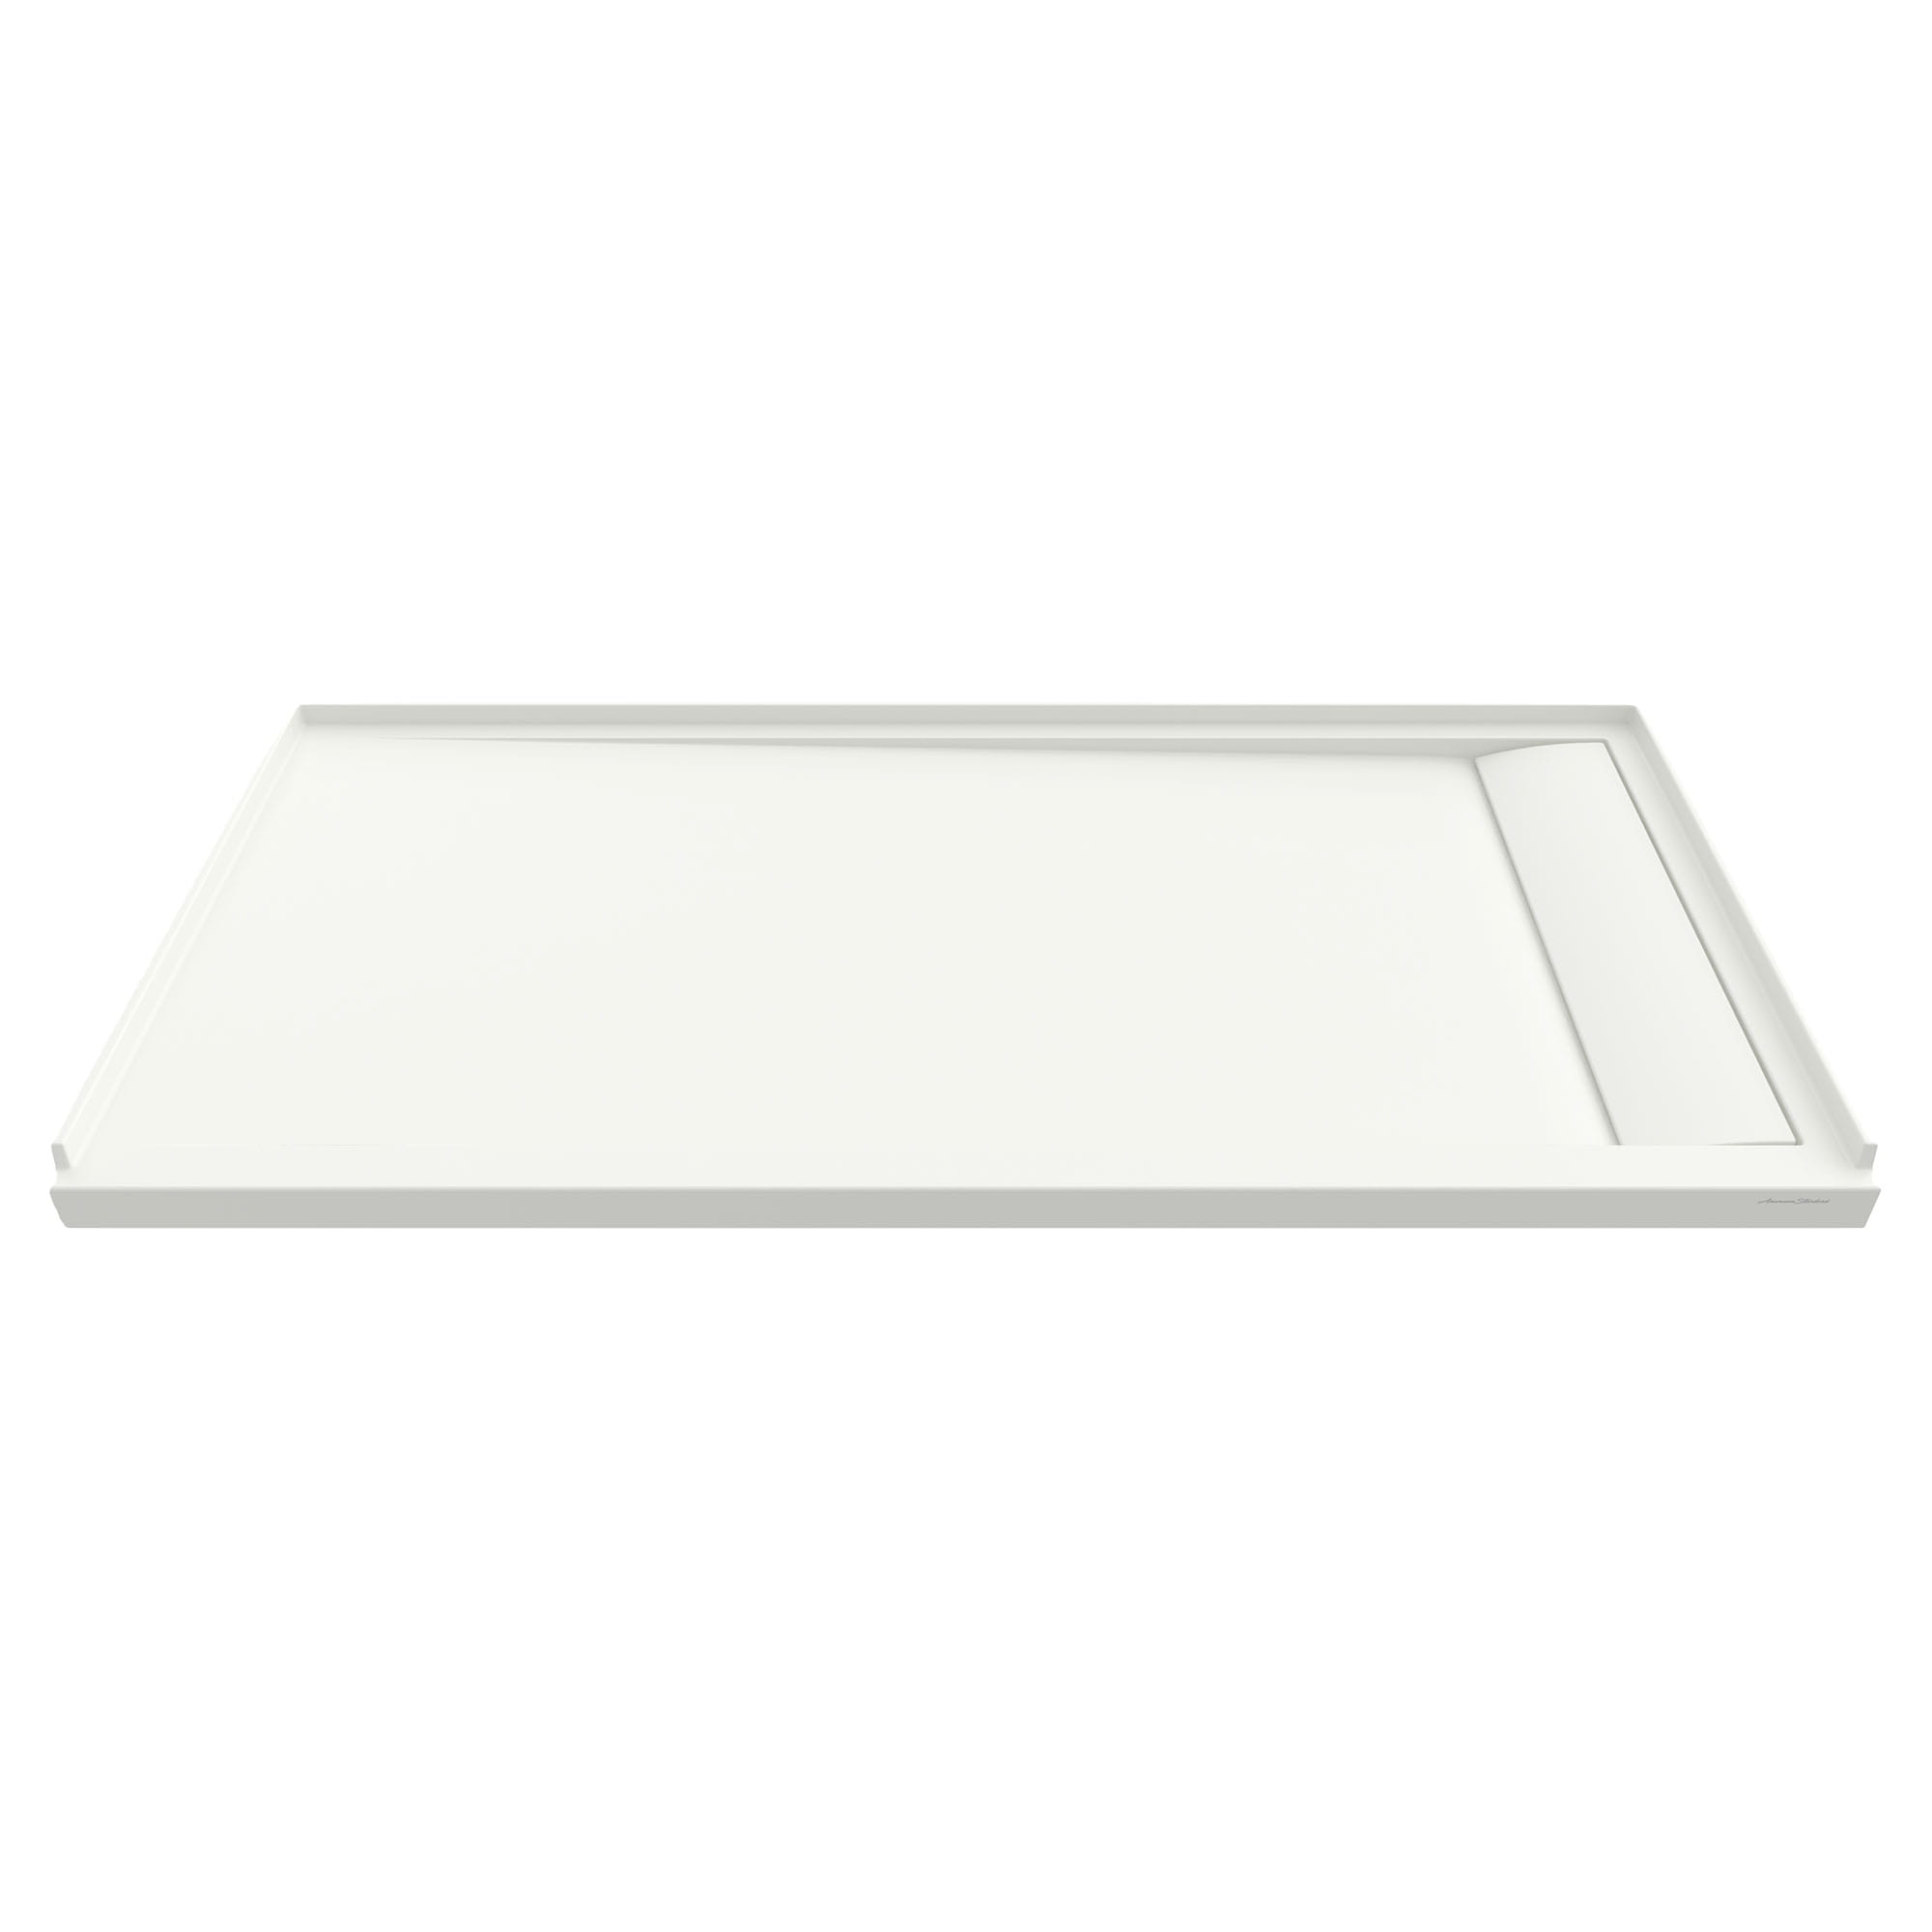 Townsend 60 x 30 Inch Single Threshold Shower Base With Right Hand Outlet SOFT WHITE